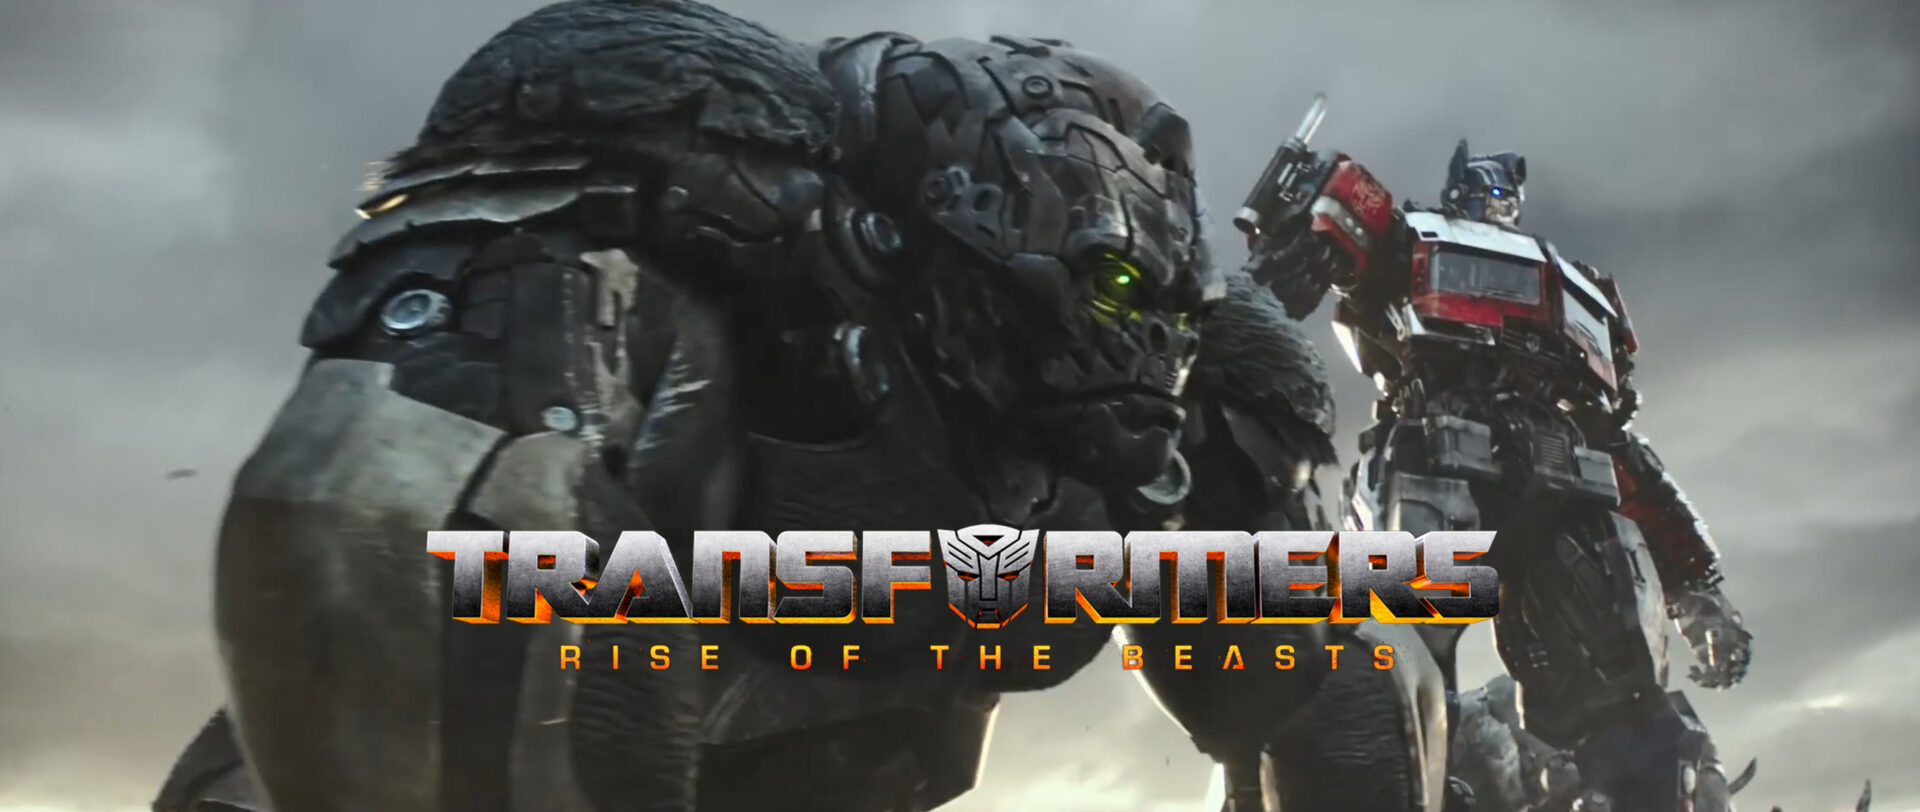 transformers rise of the beatss theatrical trailer1